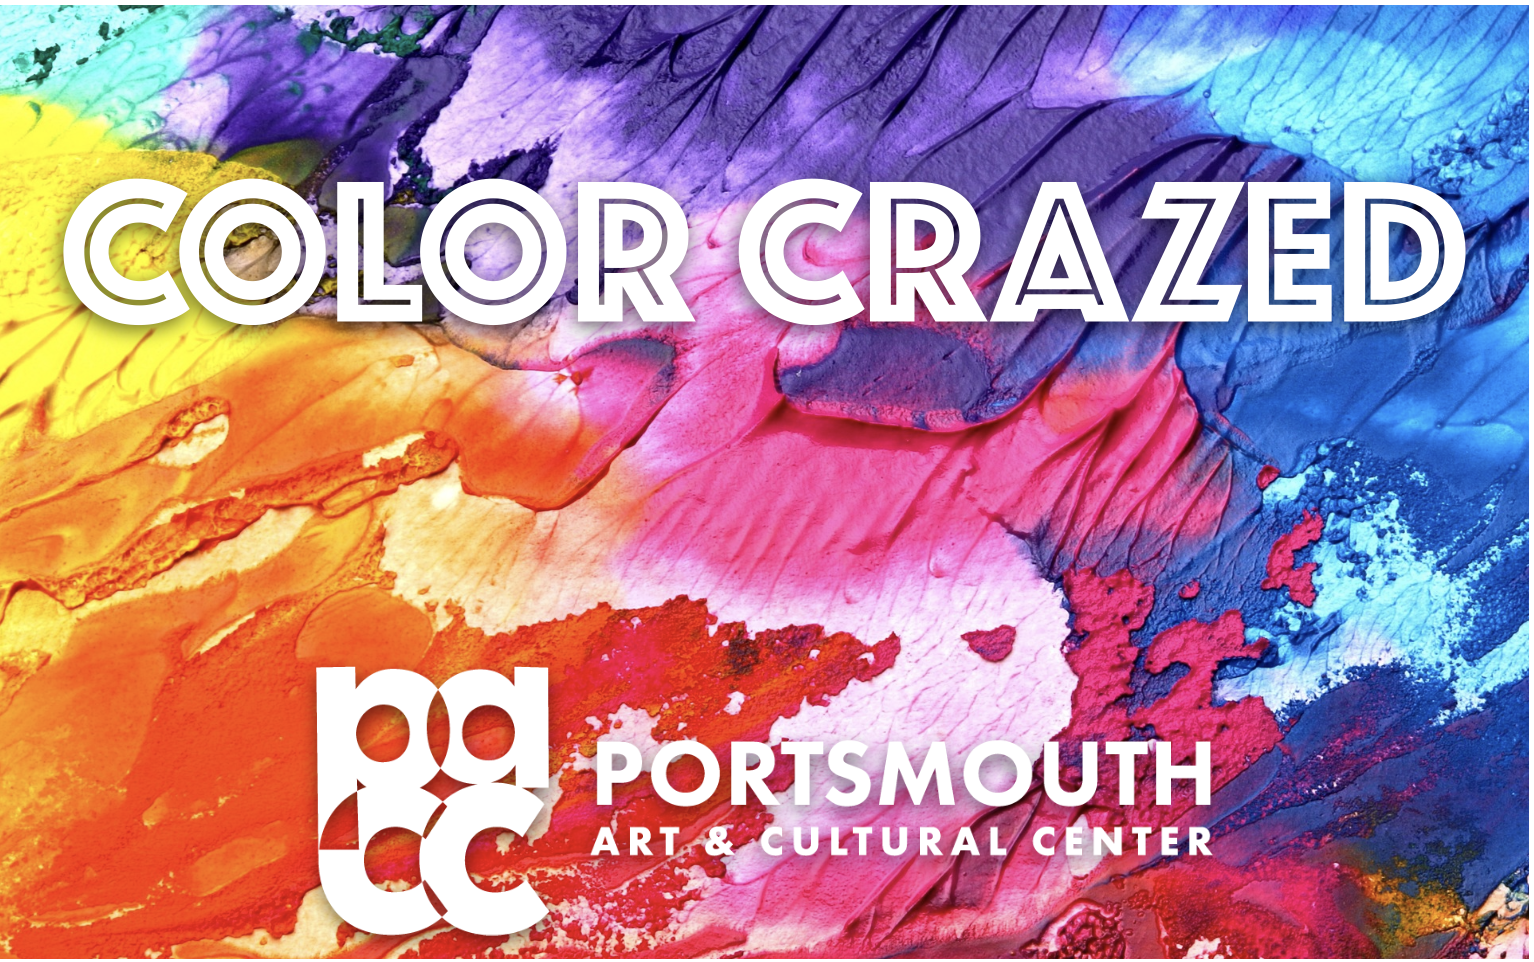 colorful background with name of event and Portsmouth Art Center logo